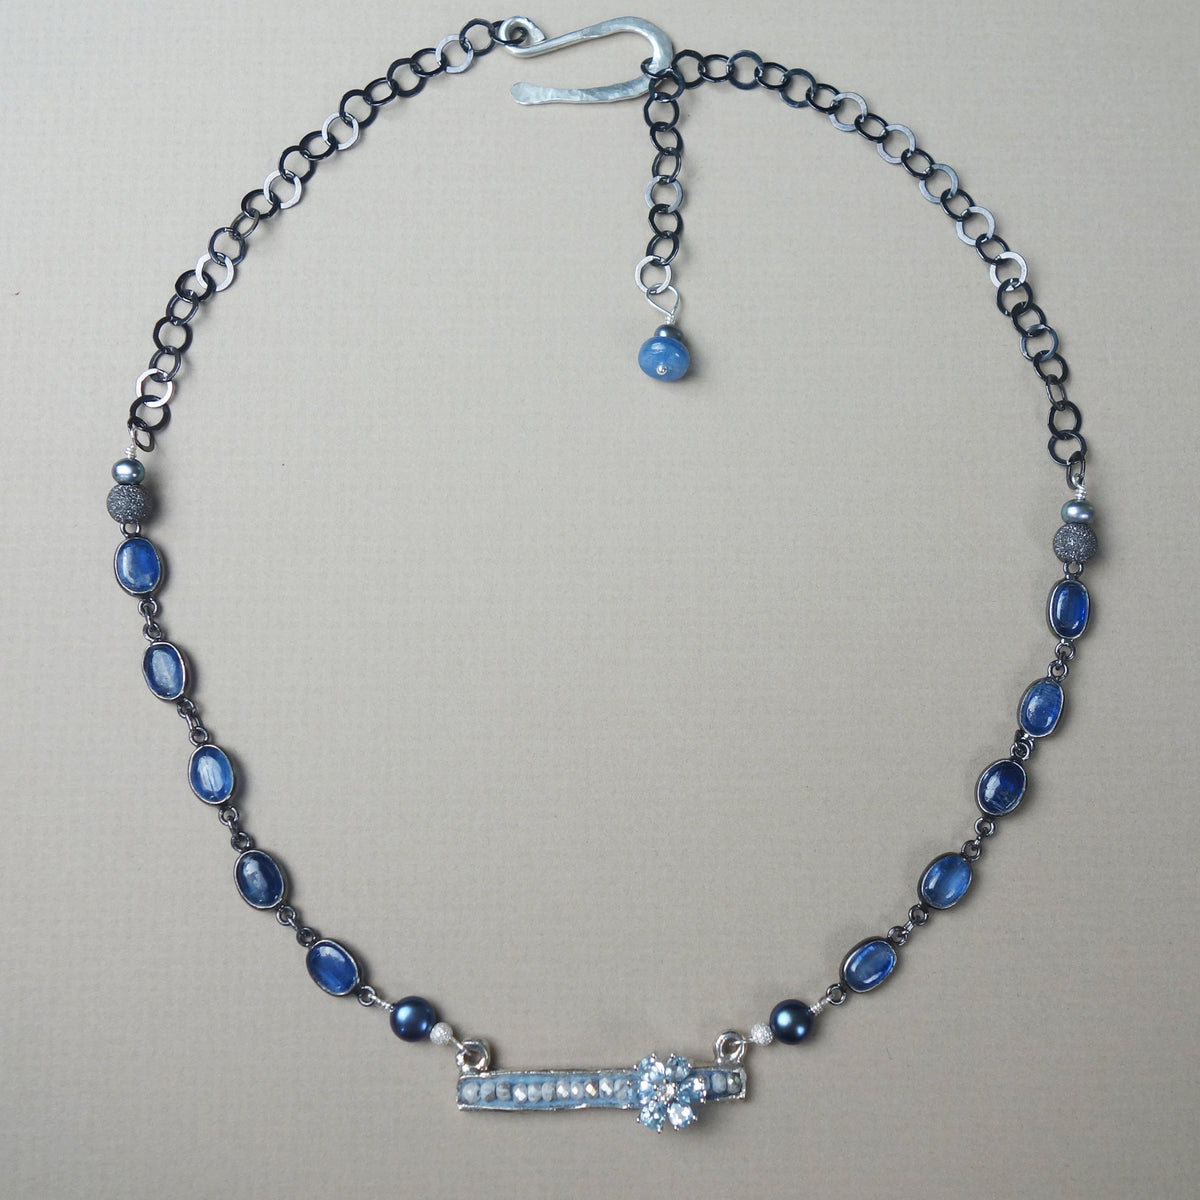 Come Talk to Me: kyanite, pearl, blue topaz mosaic necklace